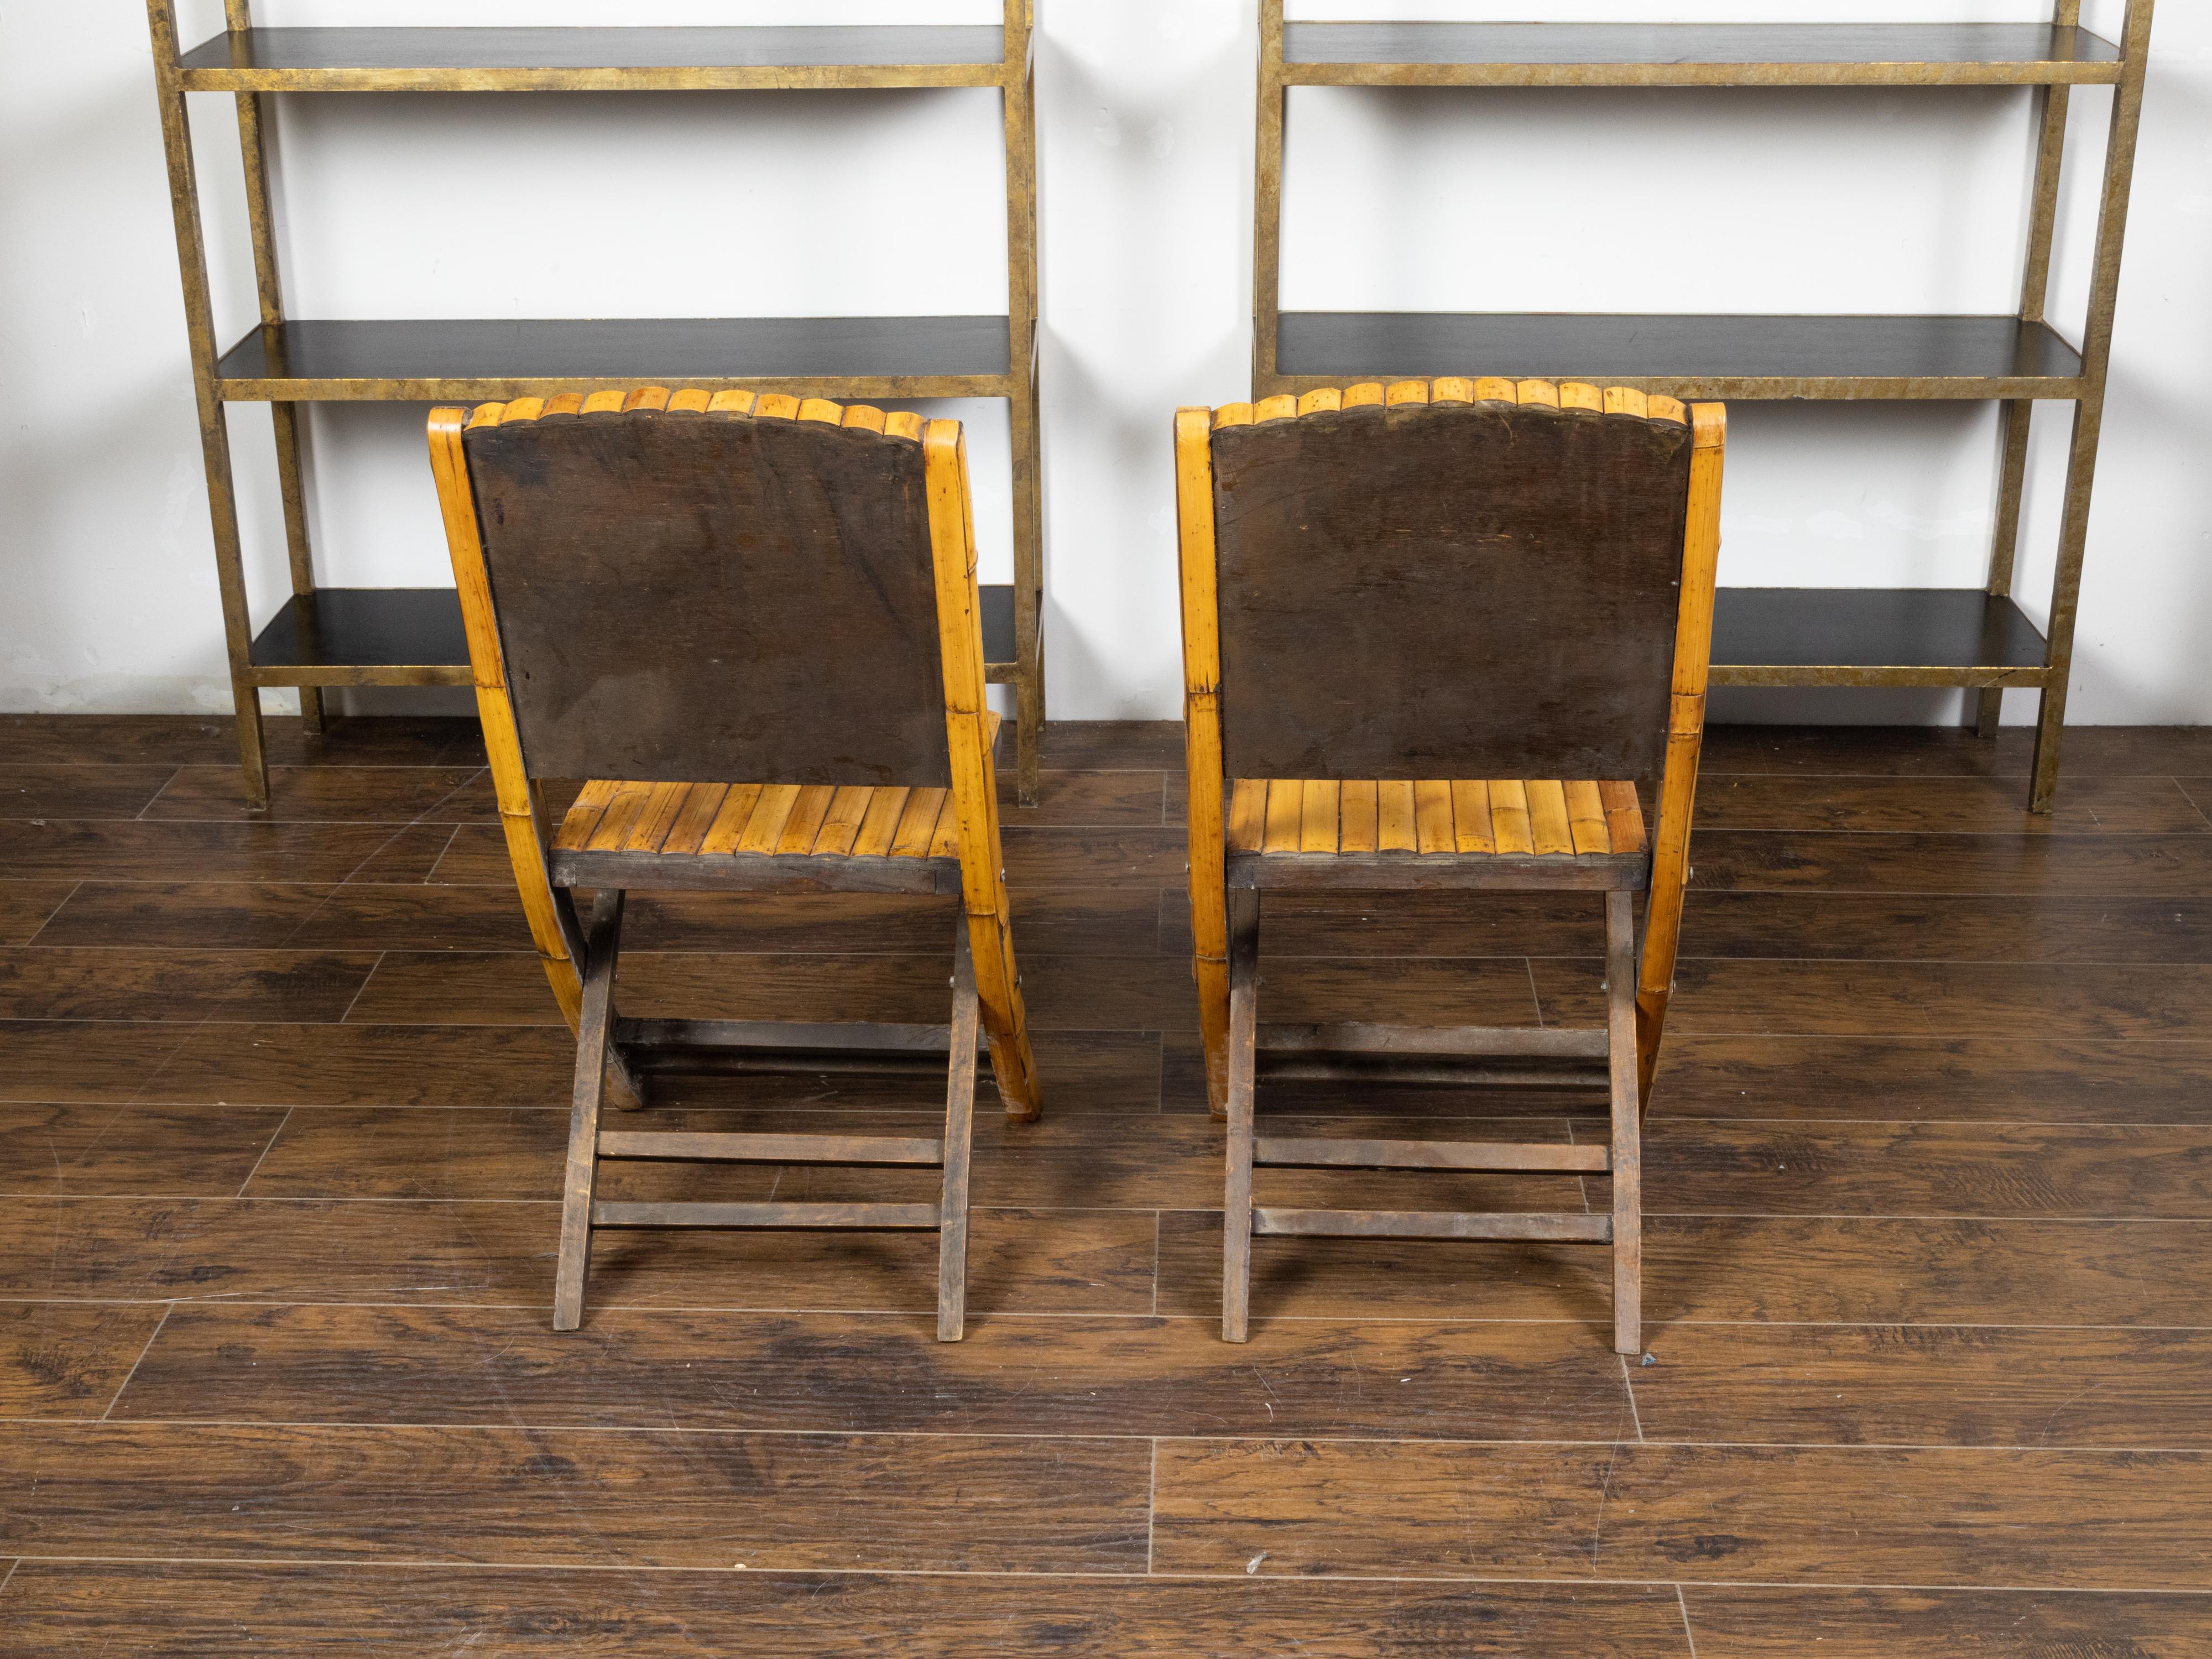 Pair of Midcentury Bamboo Folding Chairs with Slatted Design and Light Patina For Sale 2